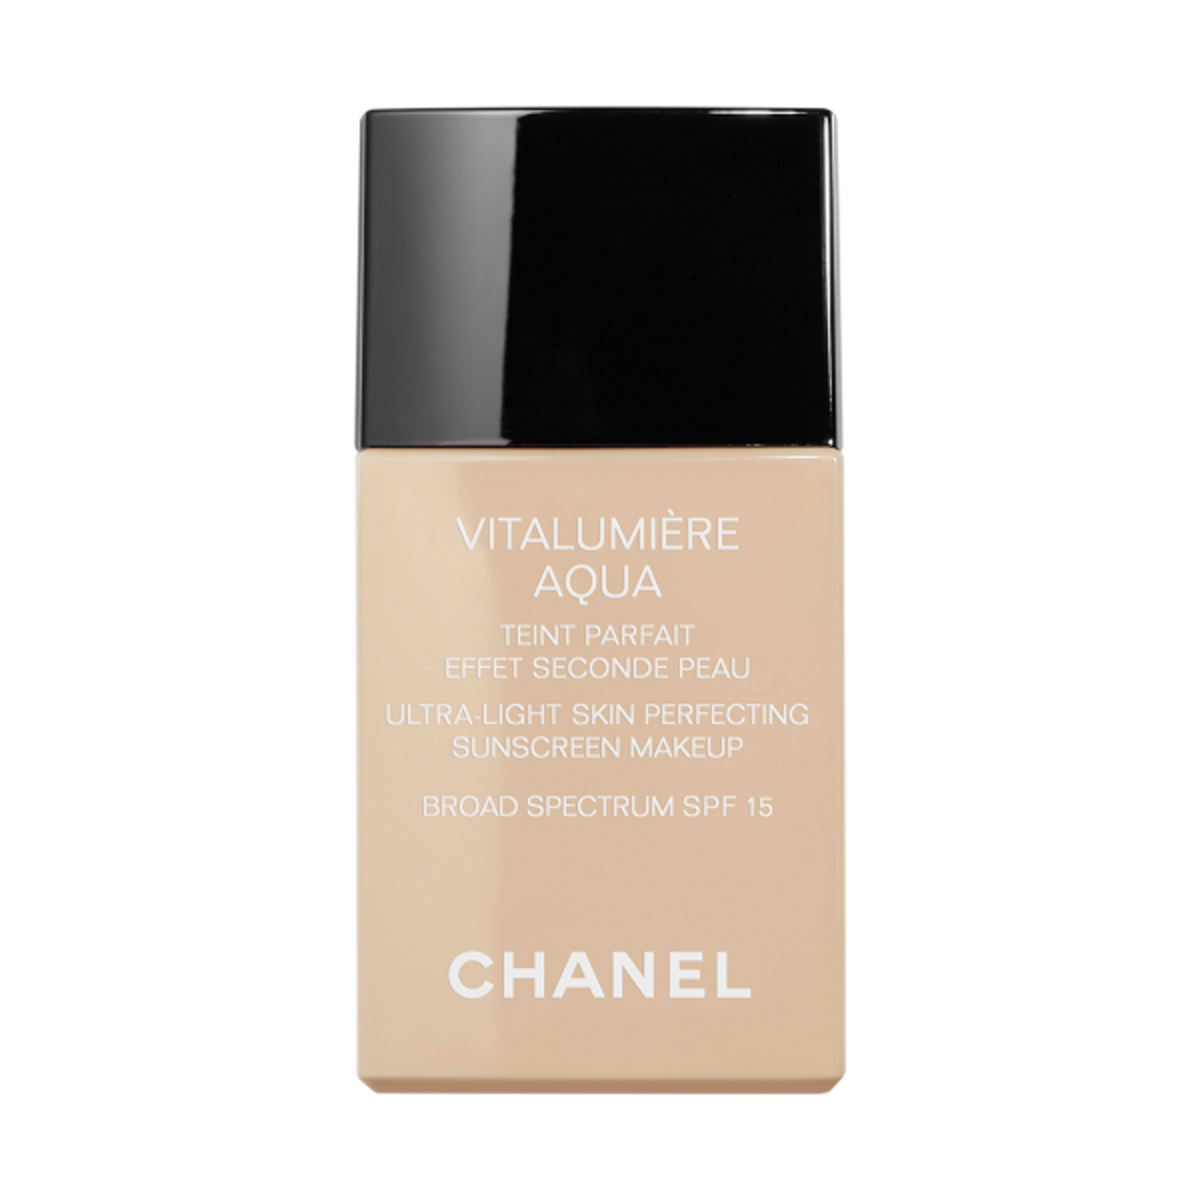 Best foundations for mature skin: Chanel Ultra-Light Skin Perfecting Makeup SPF 15